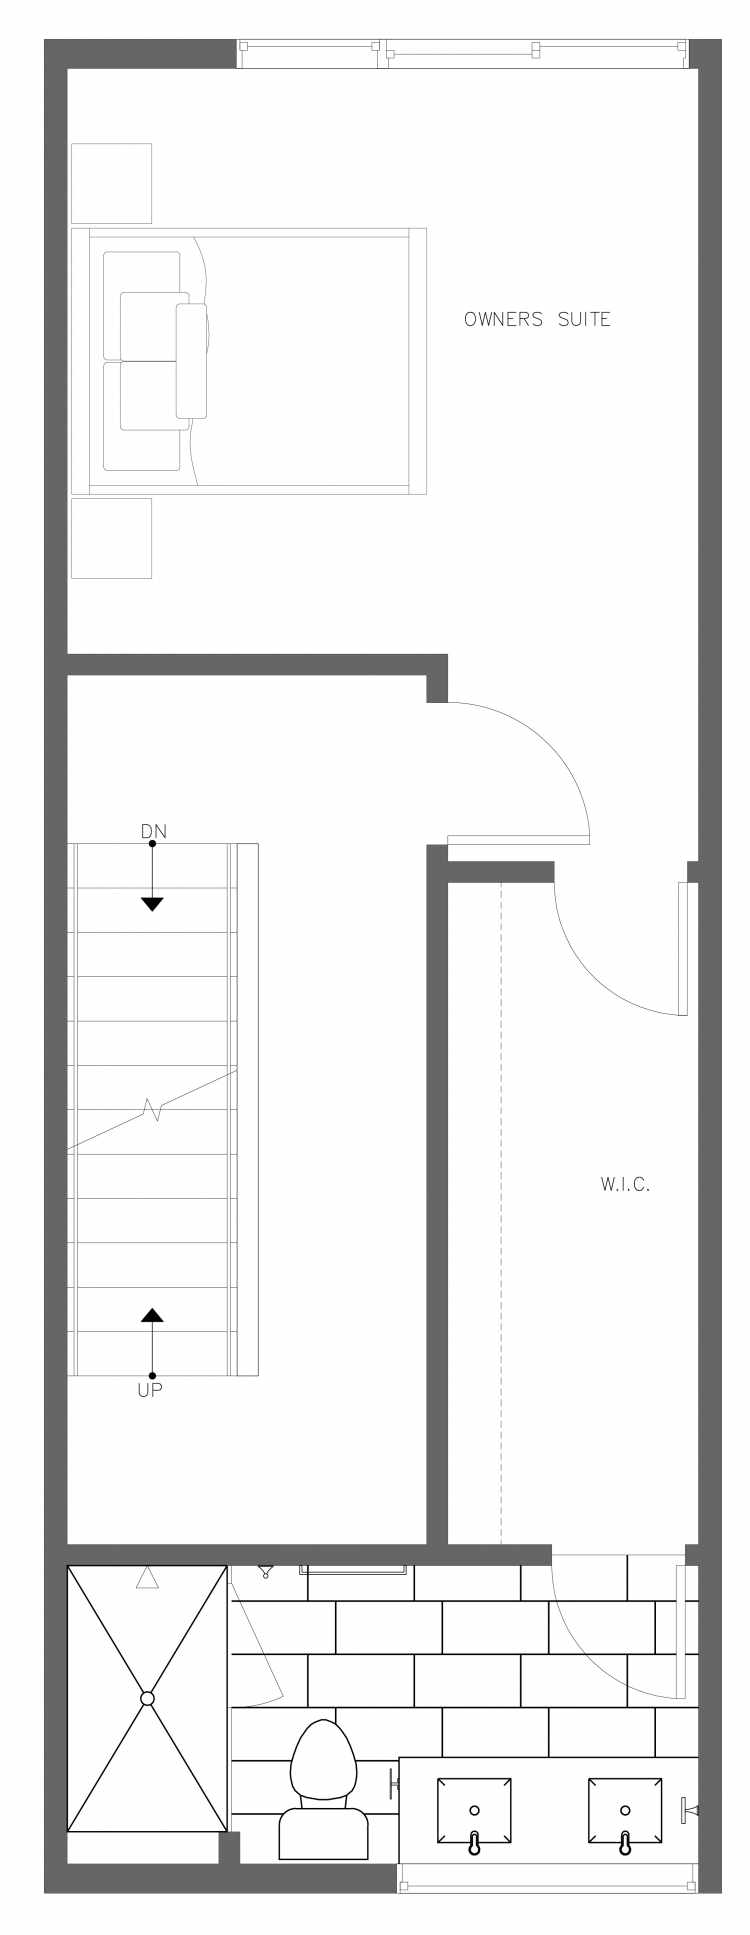 Third Floor Plan of 3406B 15th Ave W, One of the Arlo Townhomes in North Queen Anne